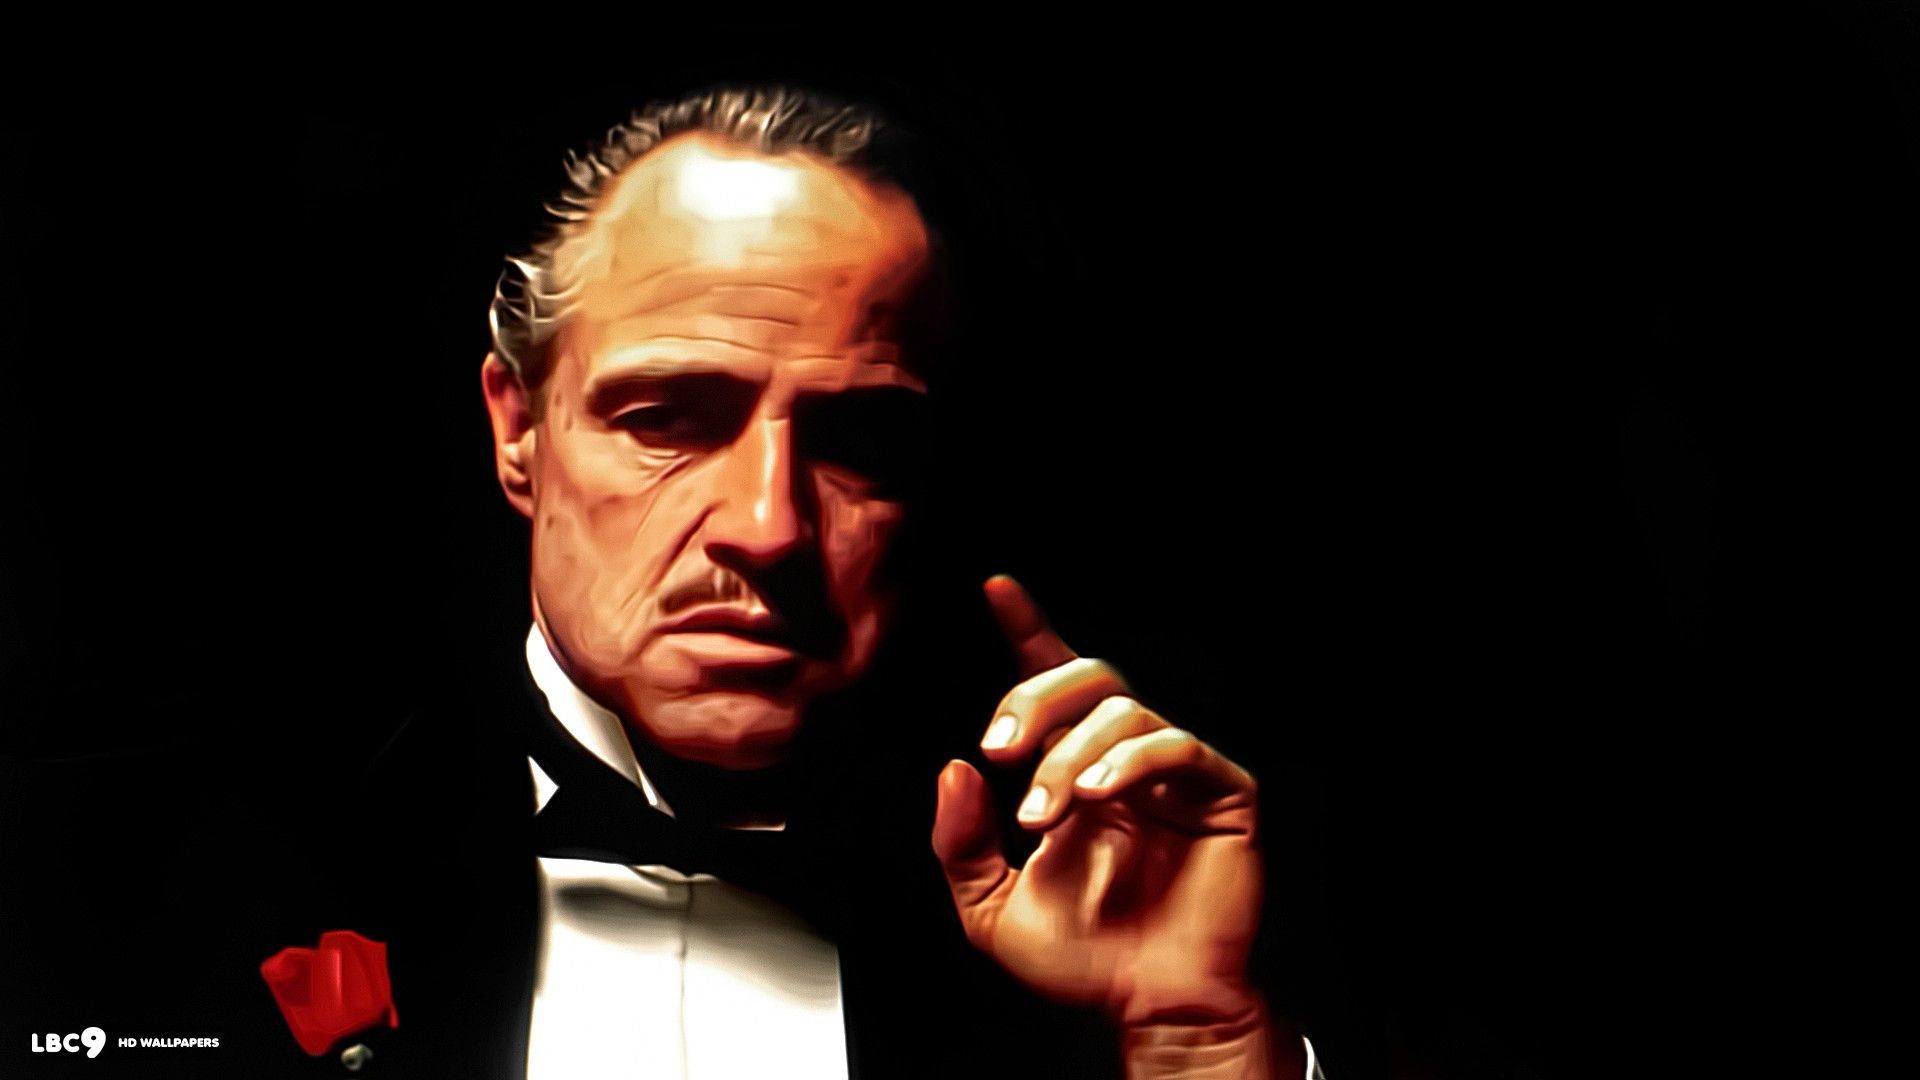 The Godfather Wallpaper Free The Godfather Background